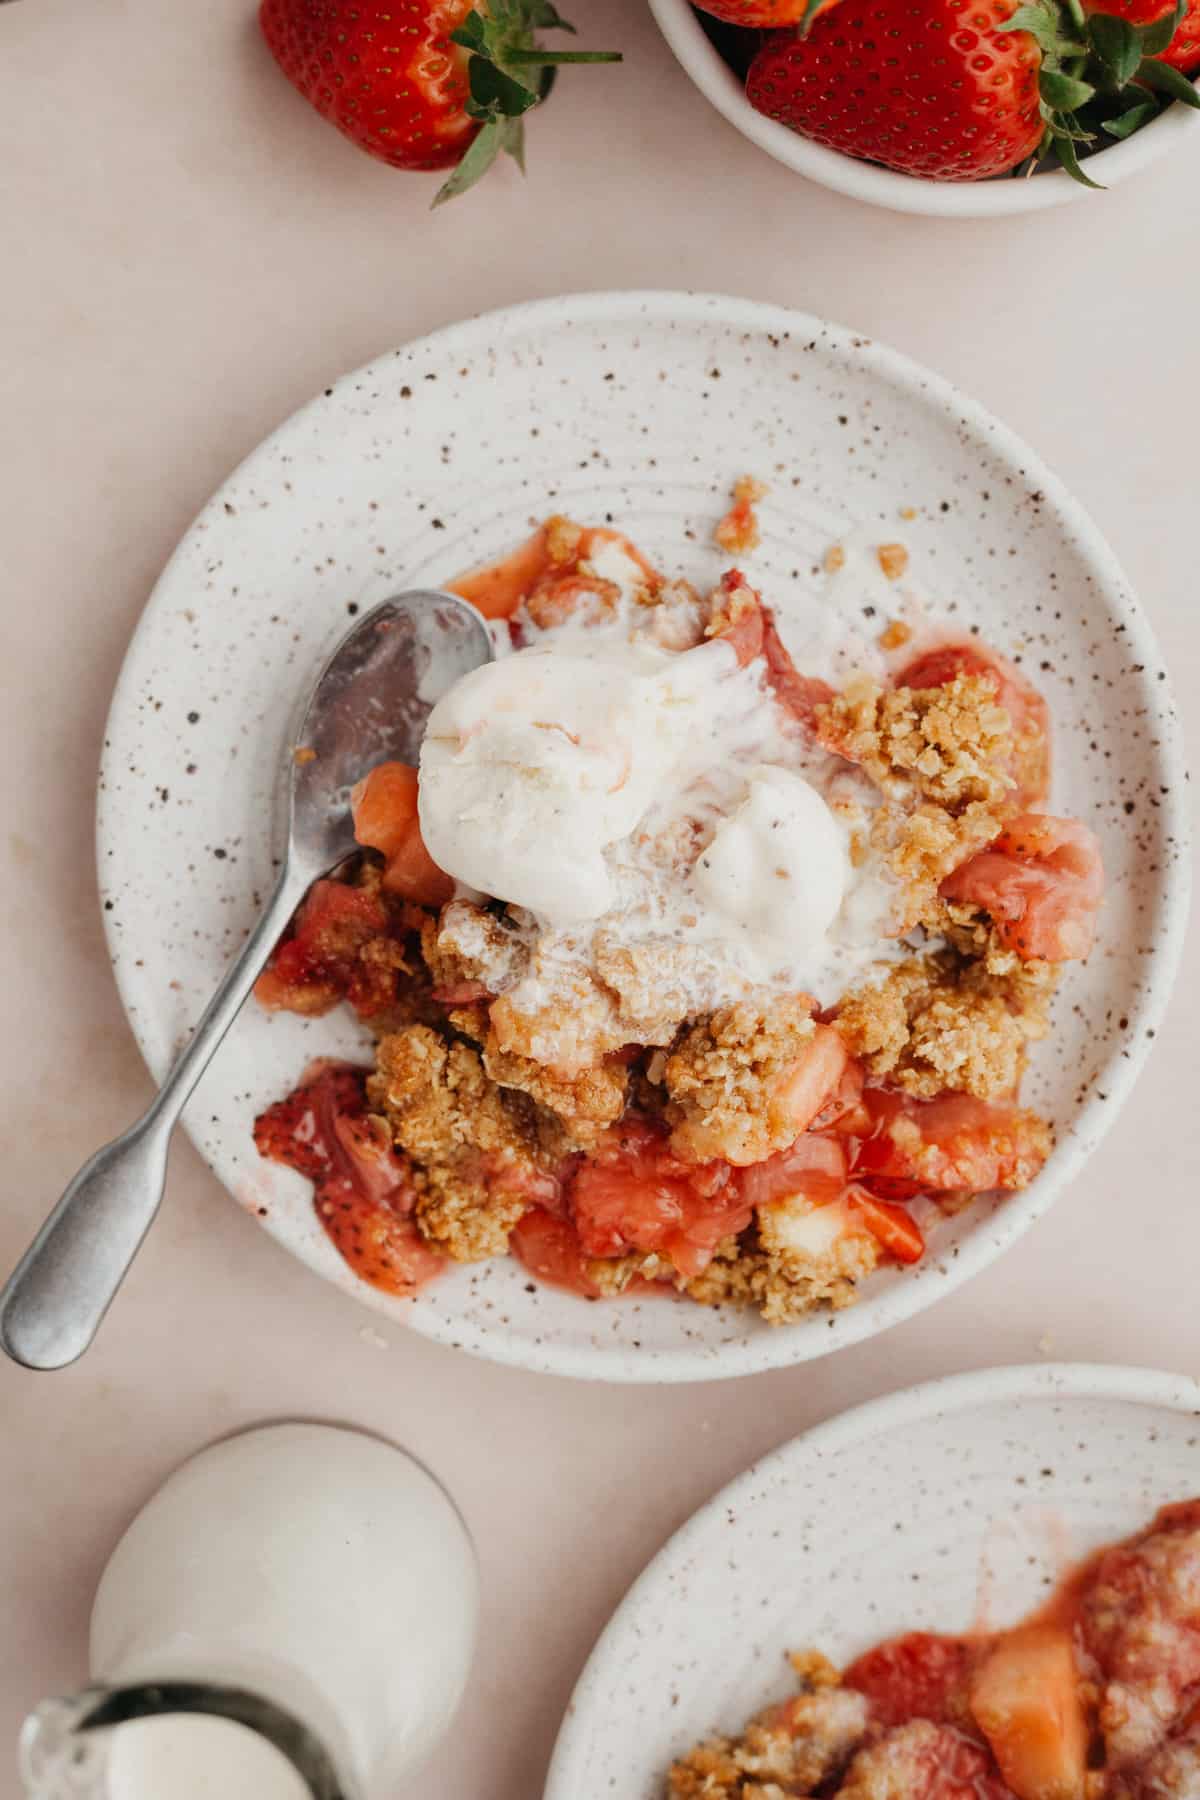 a small plate with strawberry crisp on it and a scoop of vanilla ice cream.